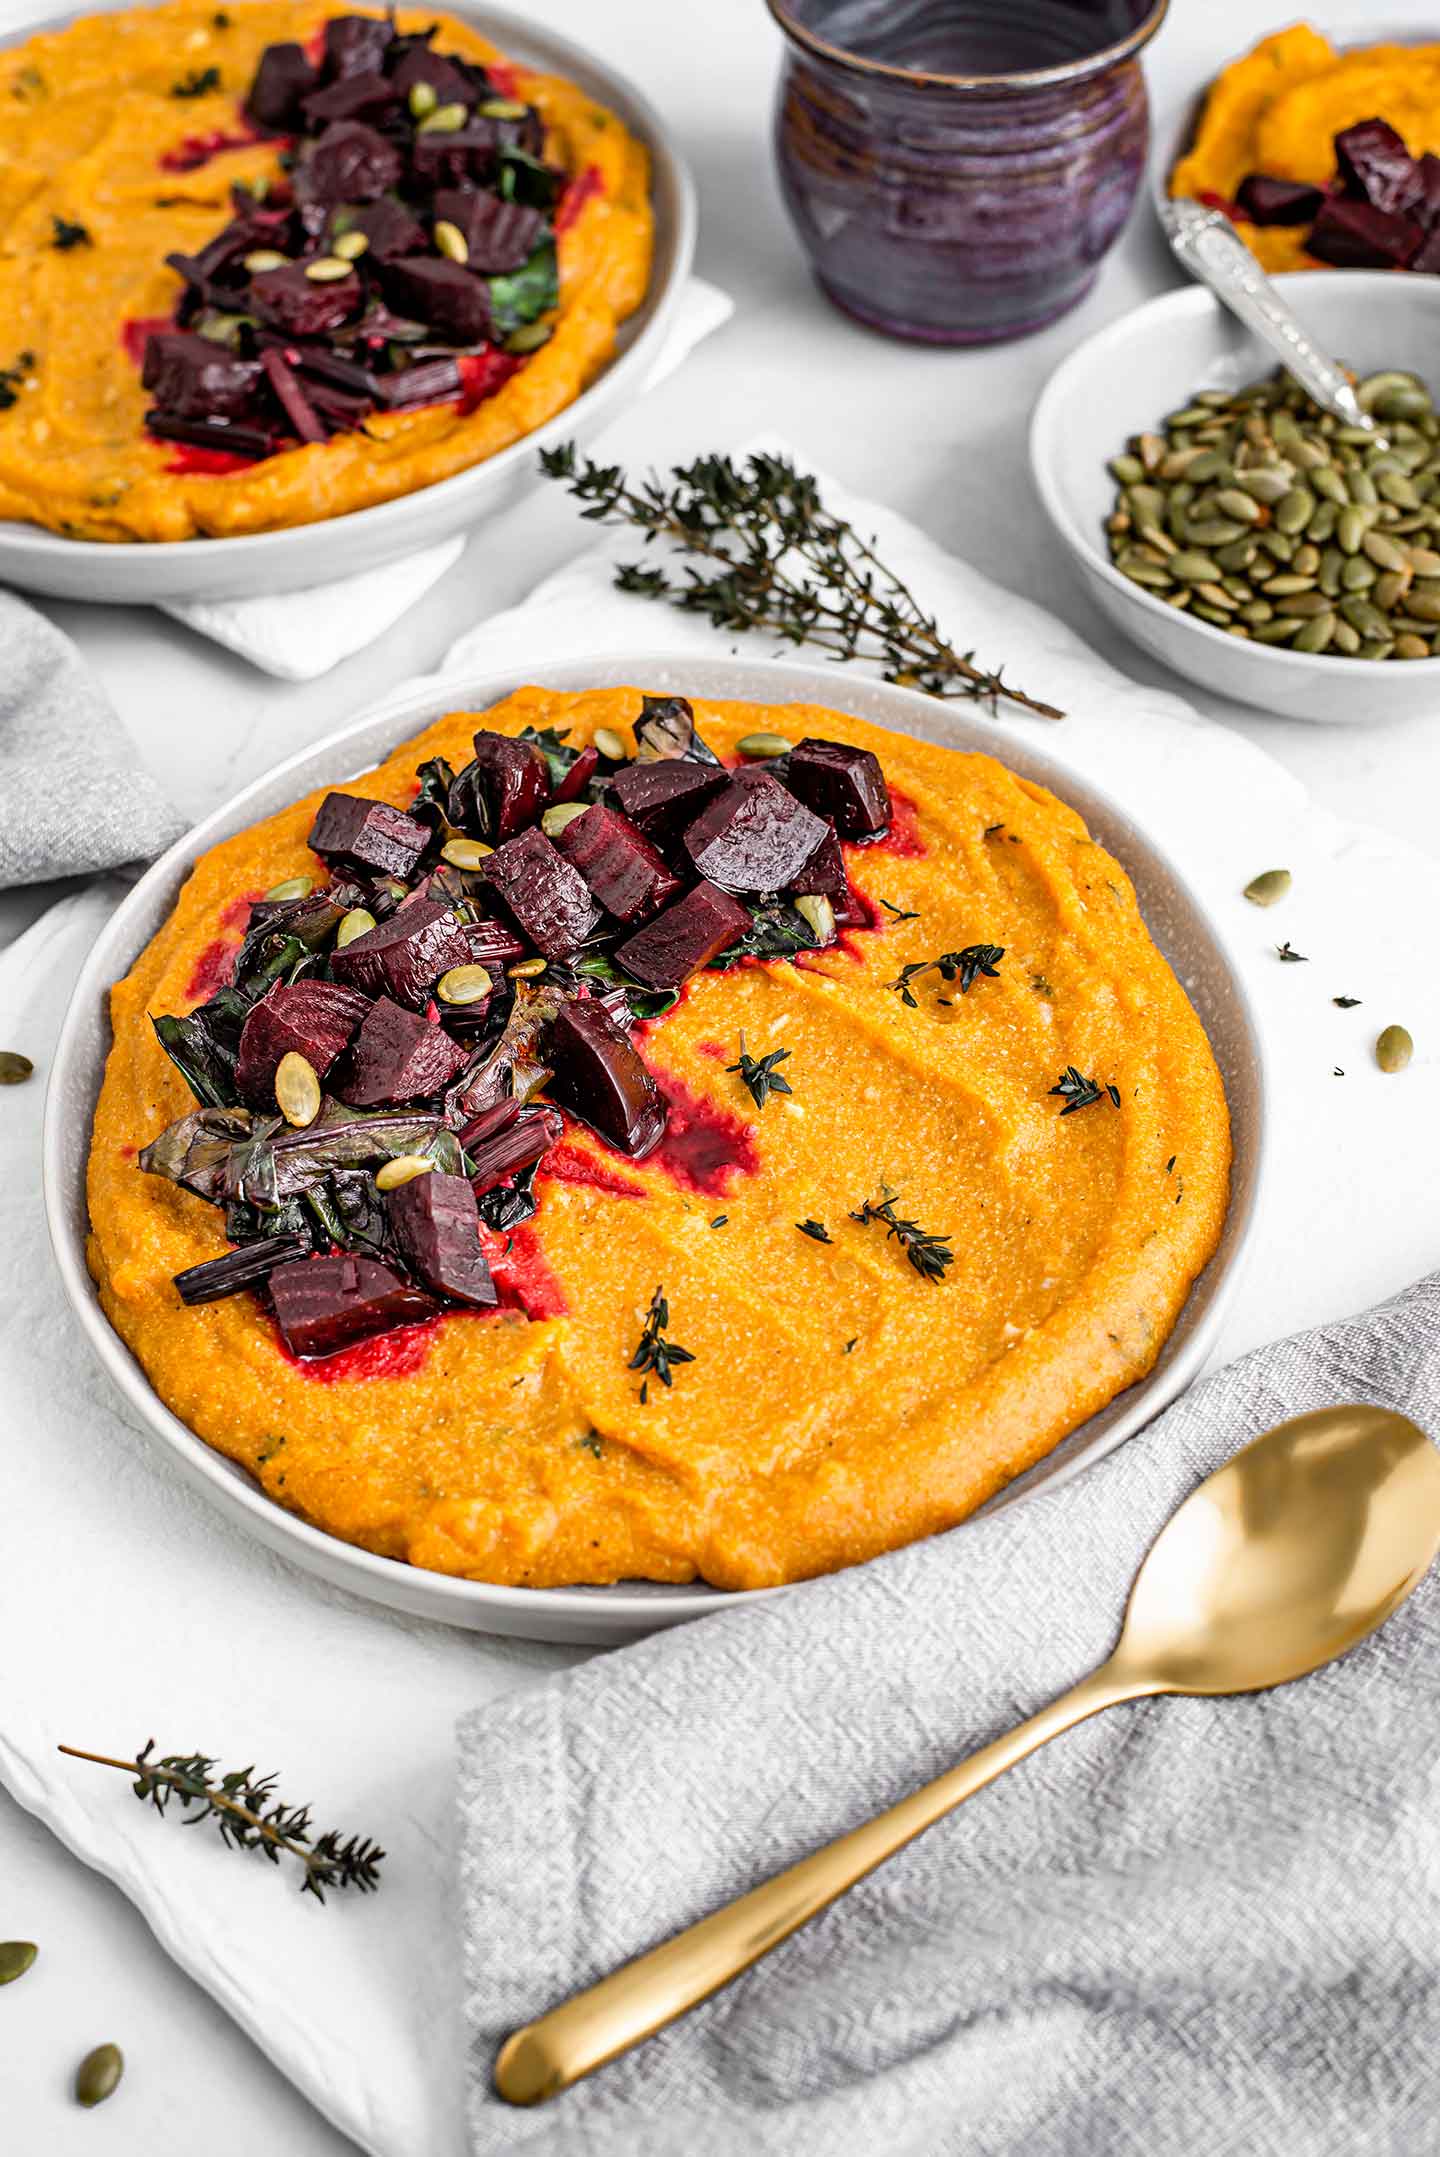 Top down view of two plates of festive pumpkin beet polenta. The orange coloured polenta is topped with the deep purple beets, and sprinkled with pumpkin seeds and thyme.